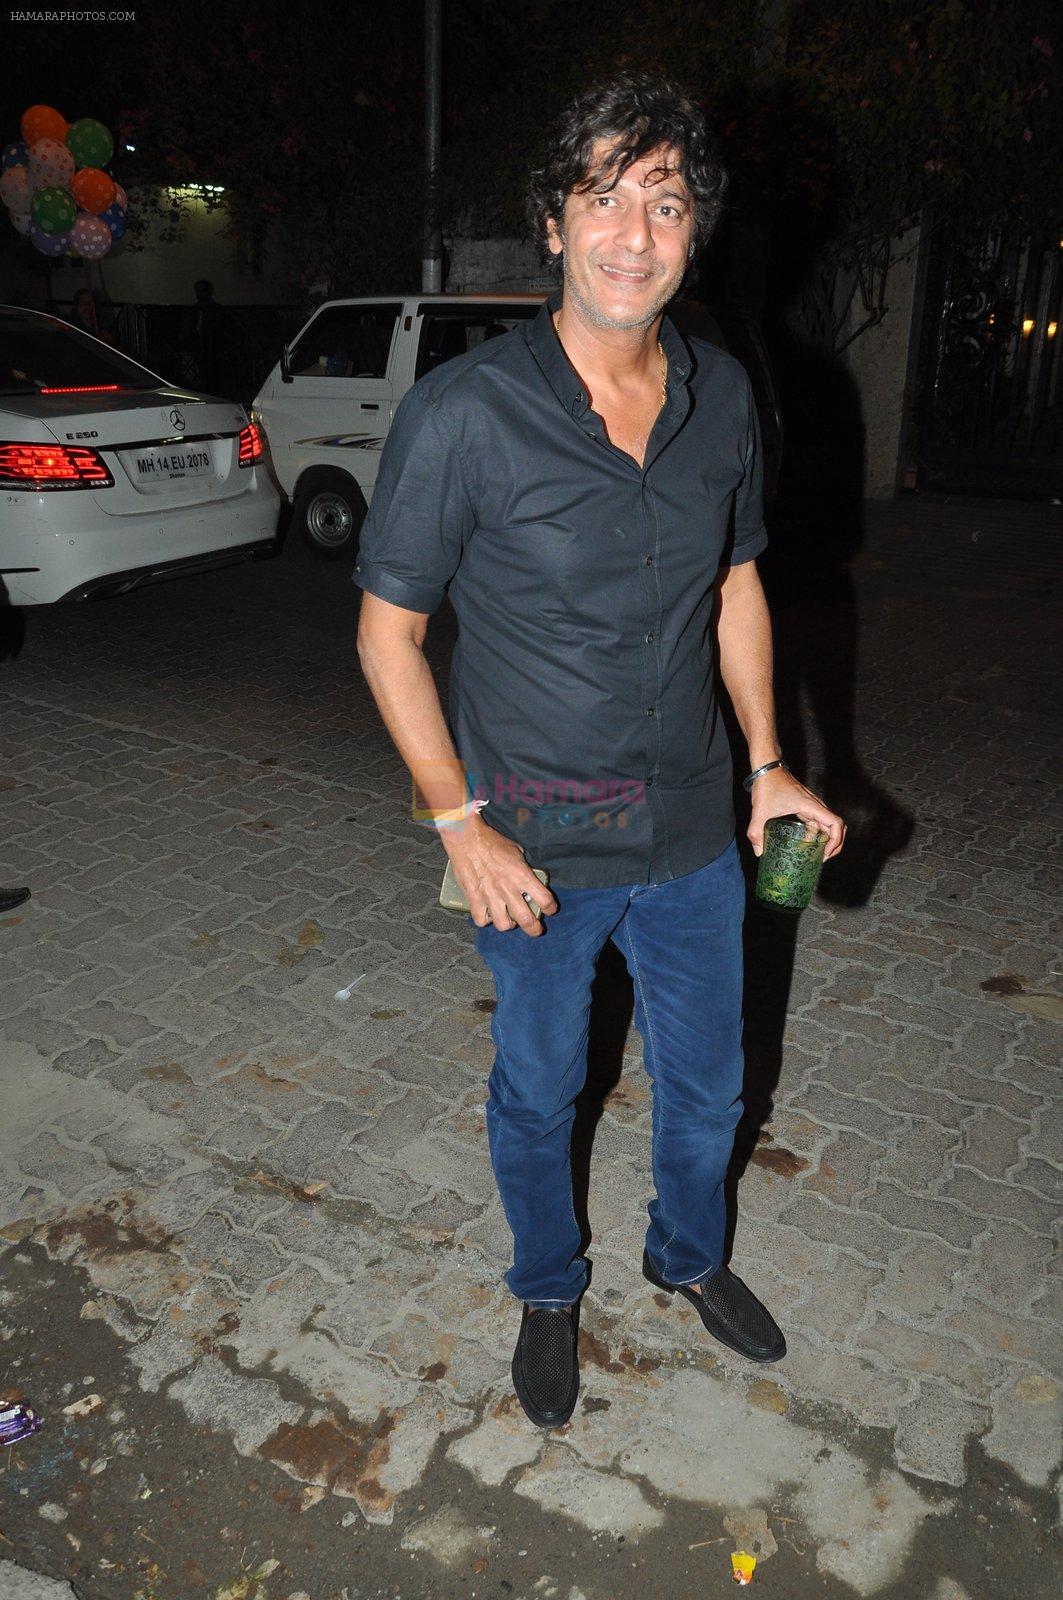 Chunky Pandey at Exceed entertainment diwali bash on 6th Nov 2015